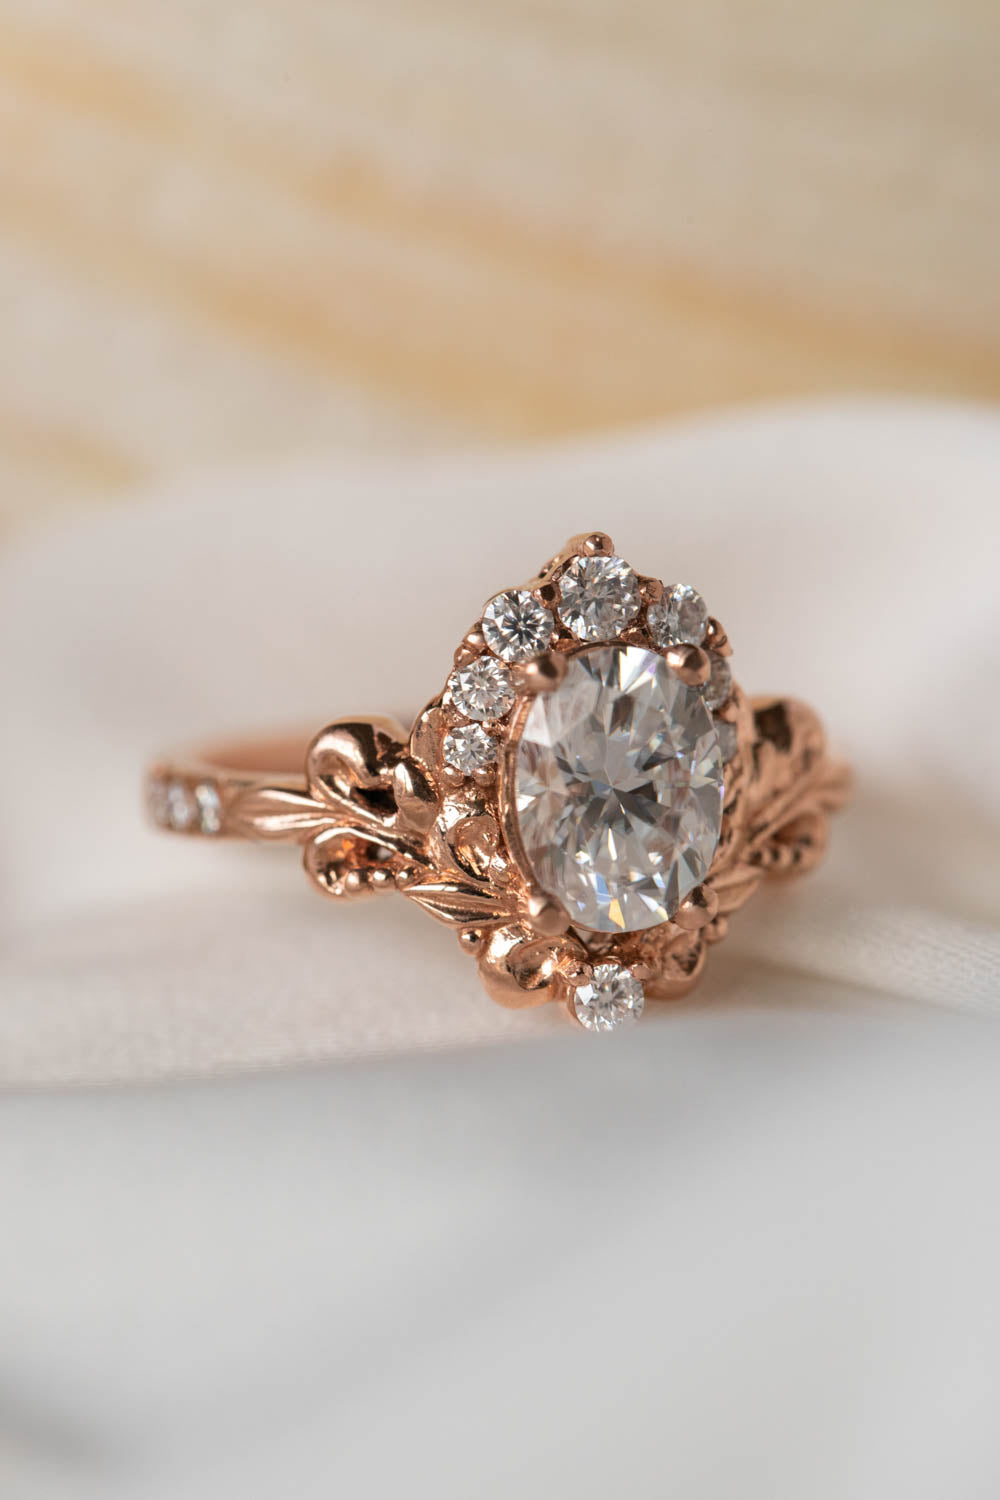 Oval Engagement Ring. Rose Gold Wedding Rings. High Quality